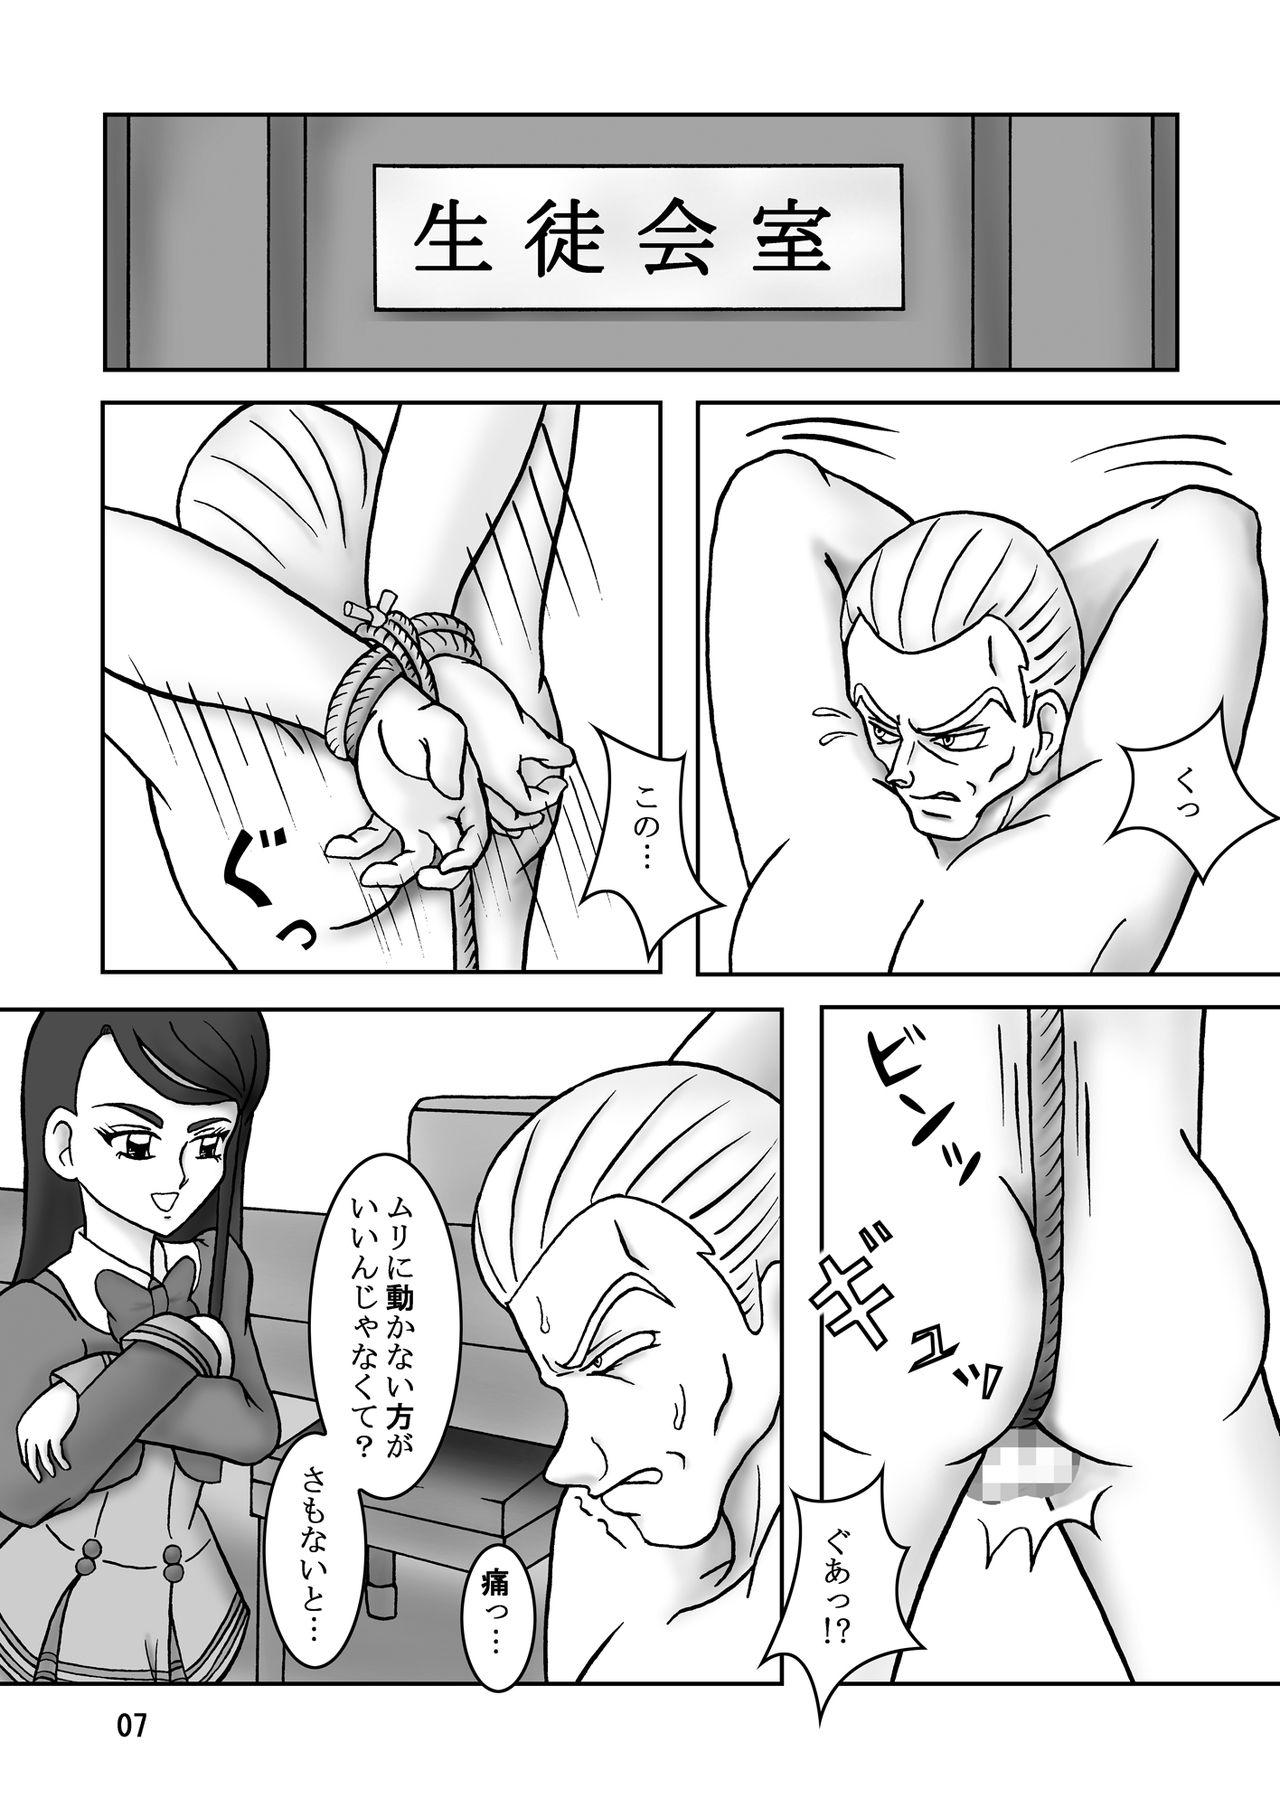 Hard Porn Yes！ズリキュア5 - Yes precure 5 Boobies - Page 9